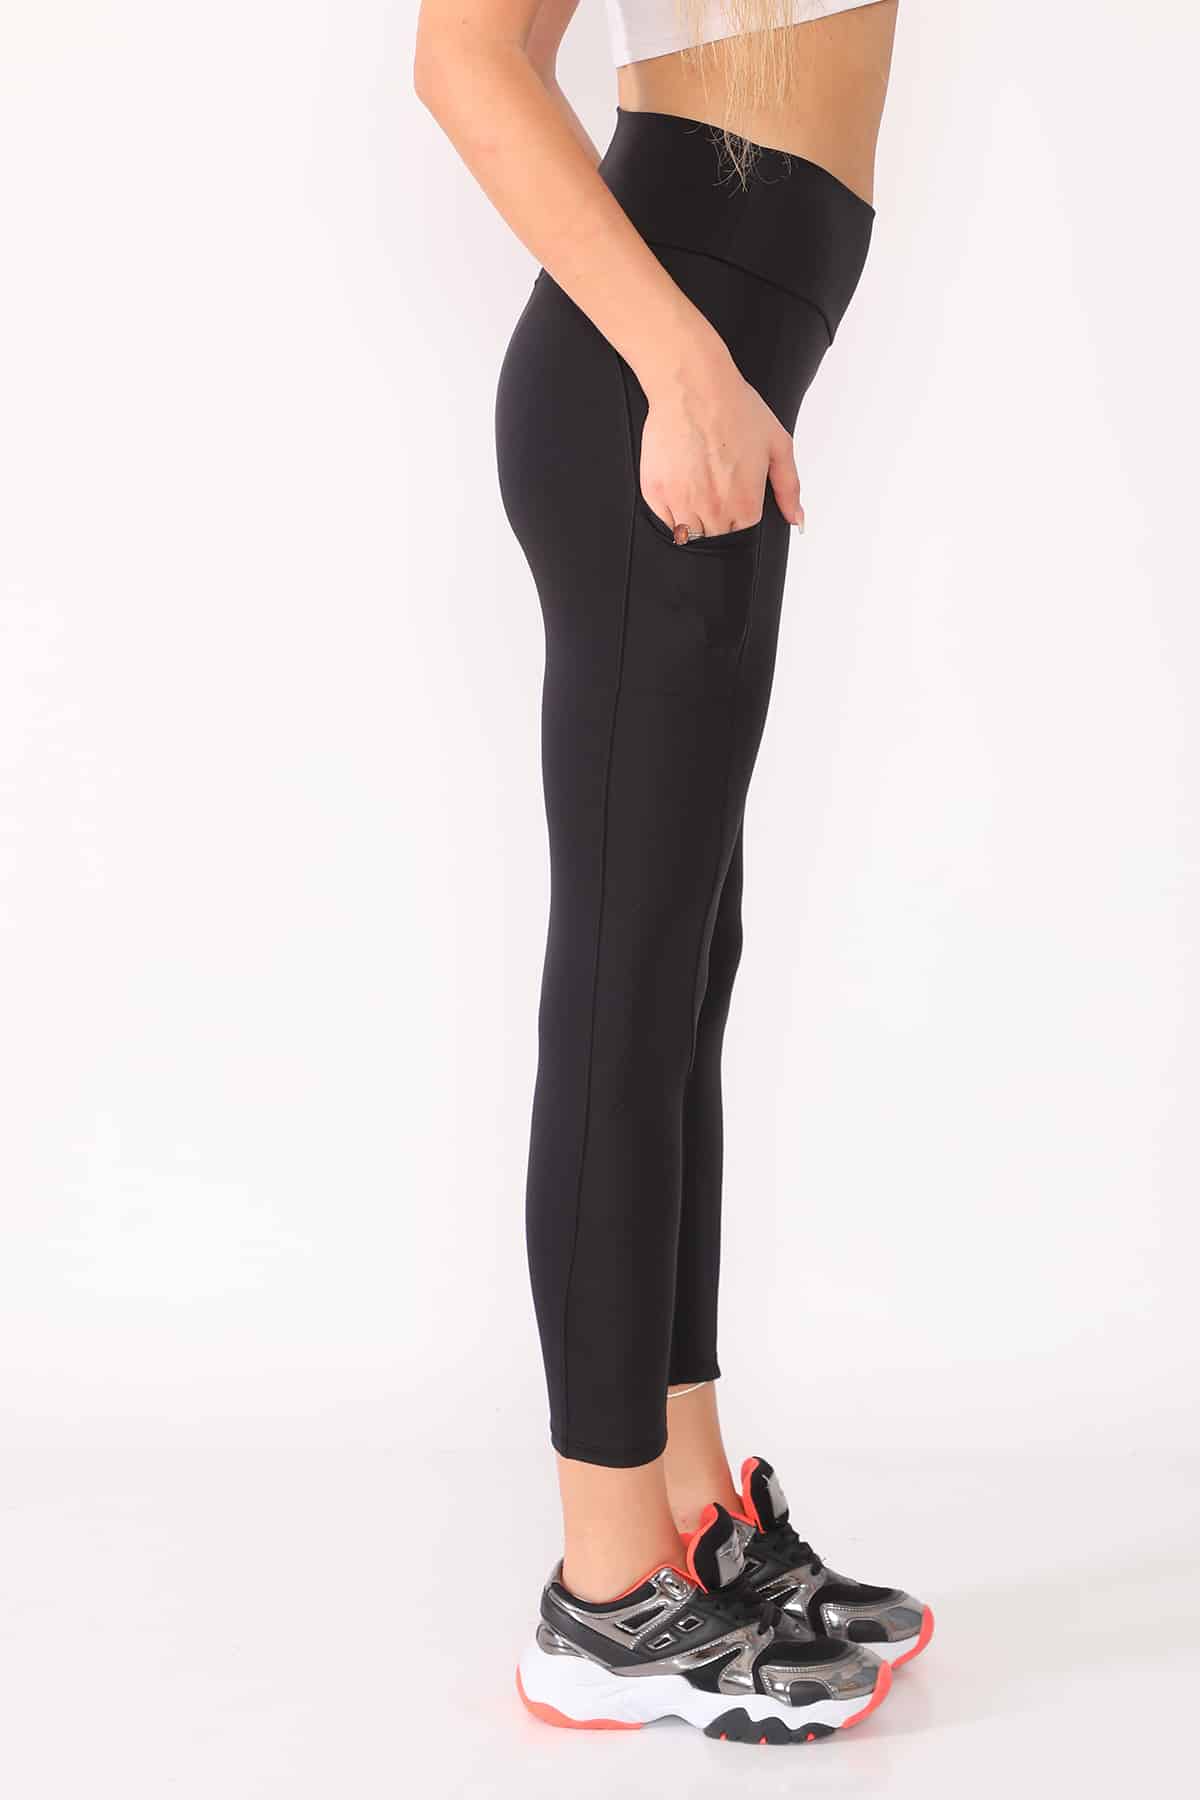 Activewear High Waisted Black Color Yoga Pants with Side Pockets